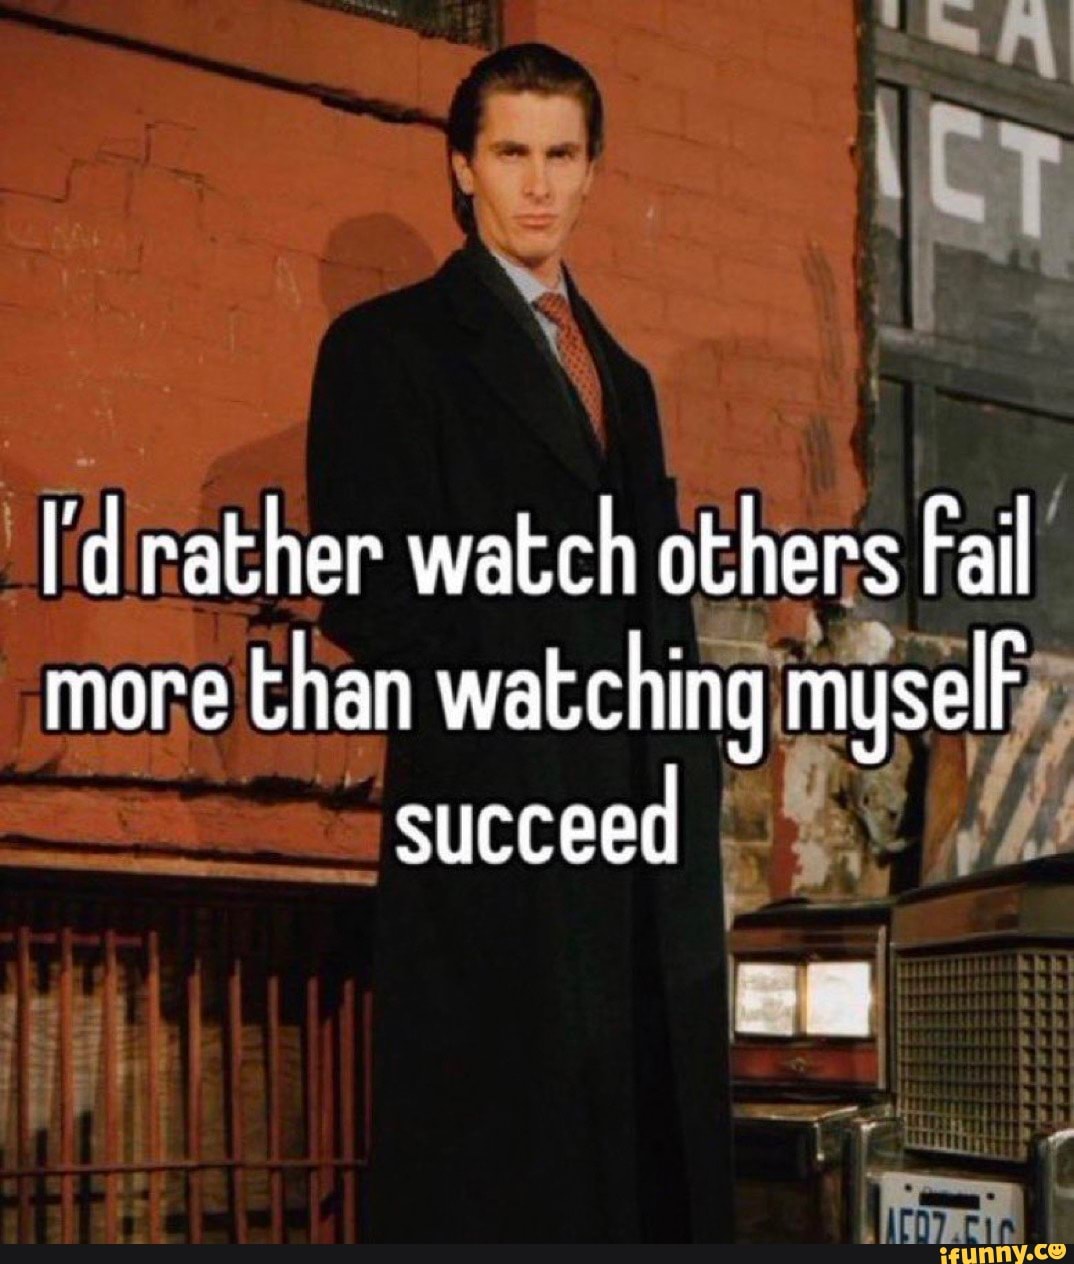 Others fail suceed. Watch myself